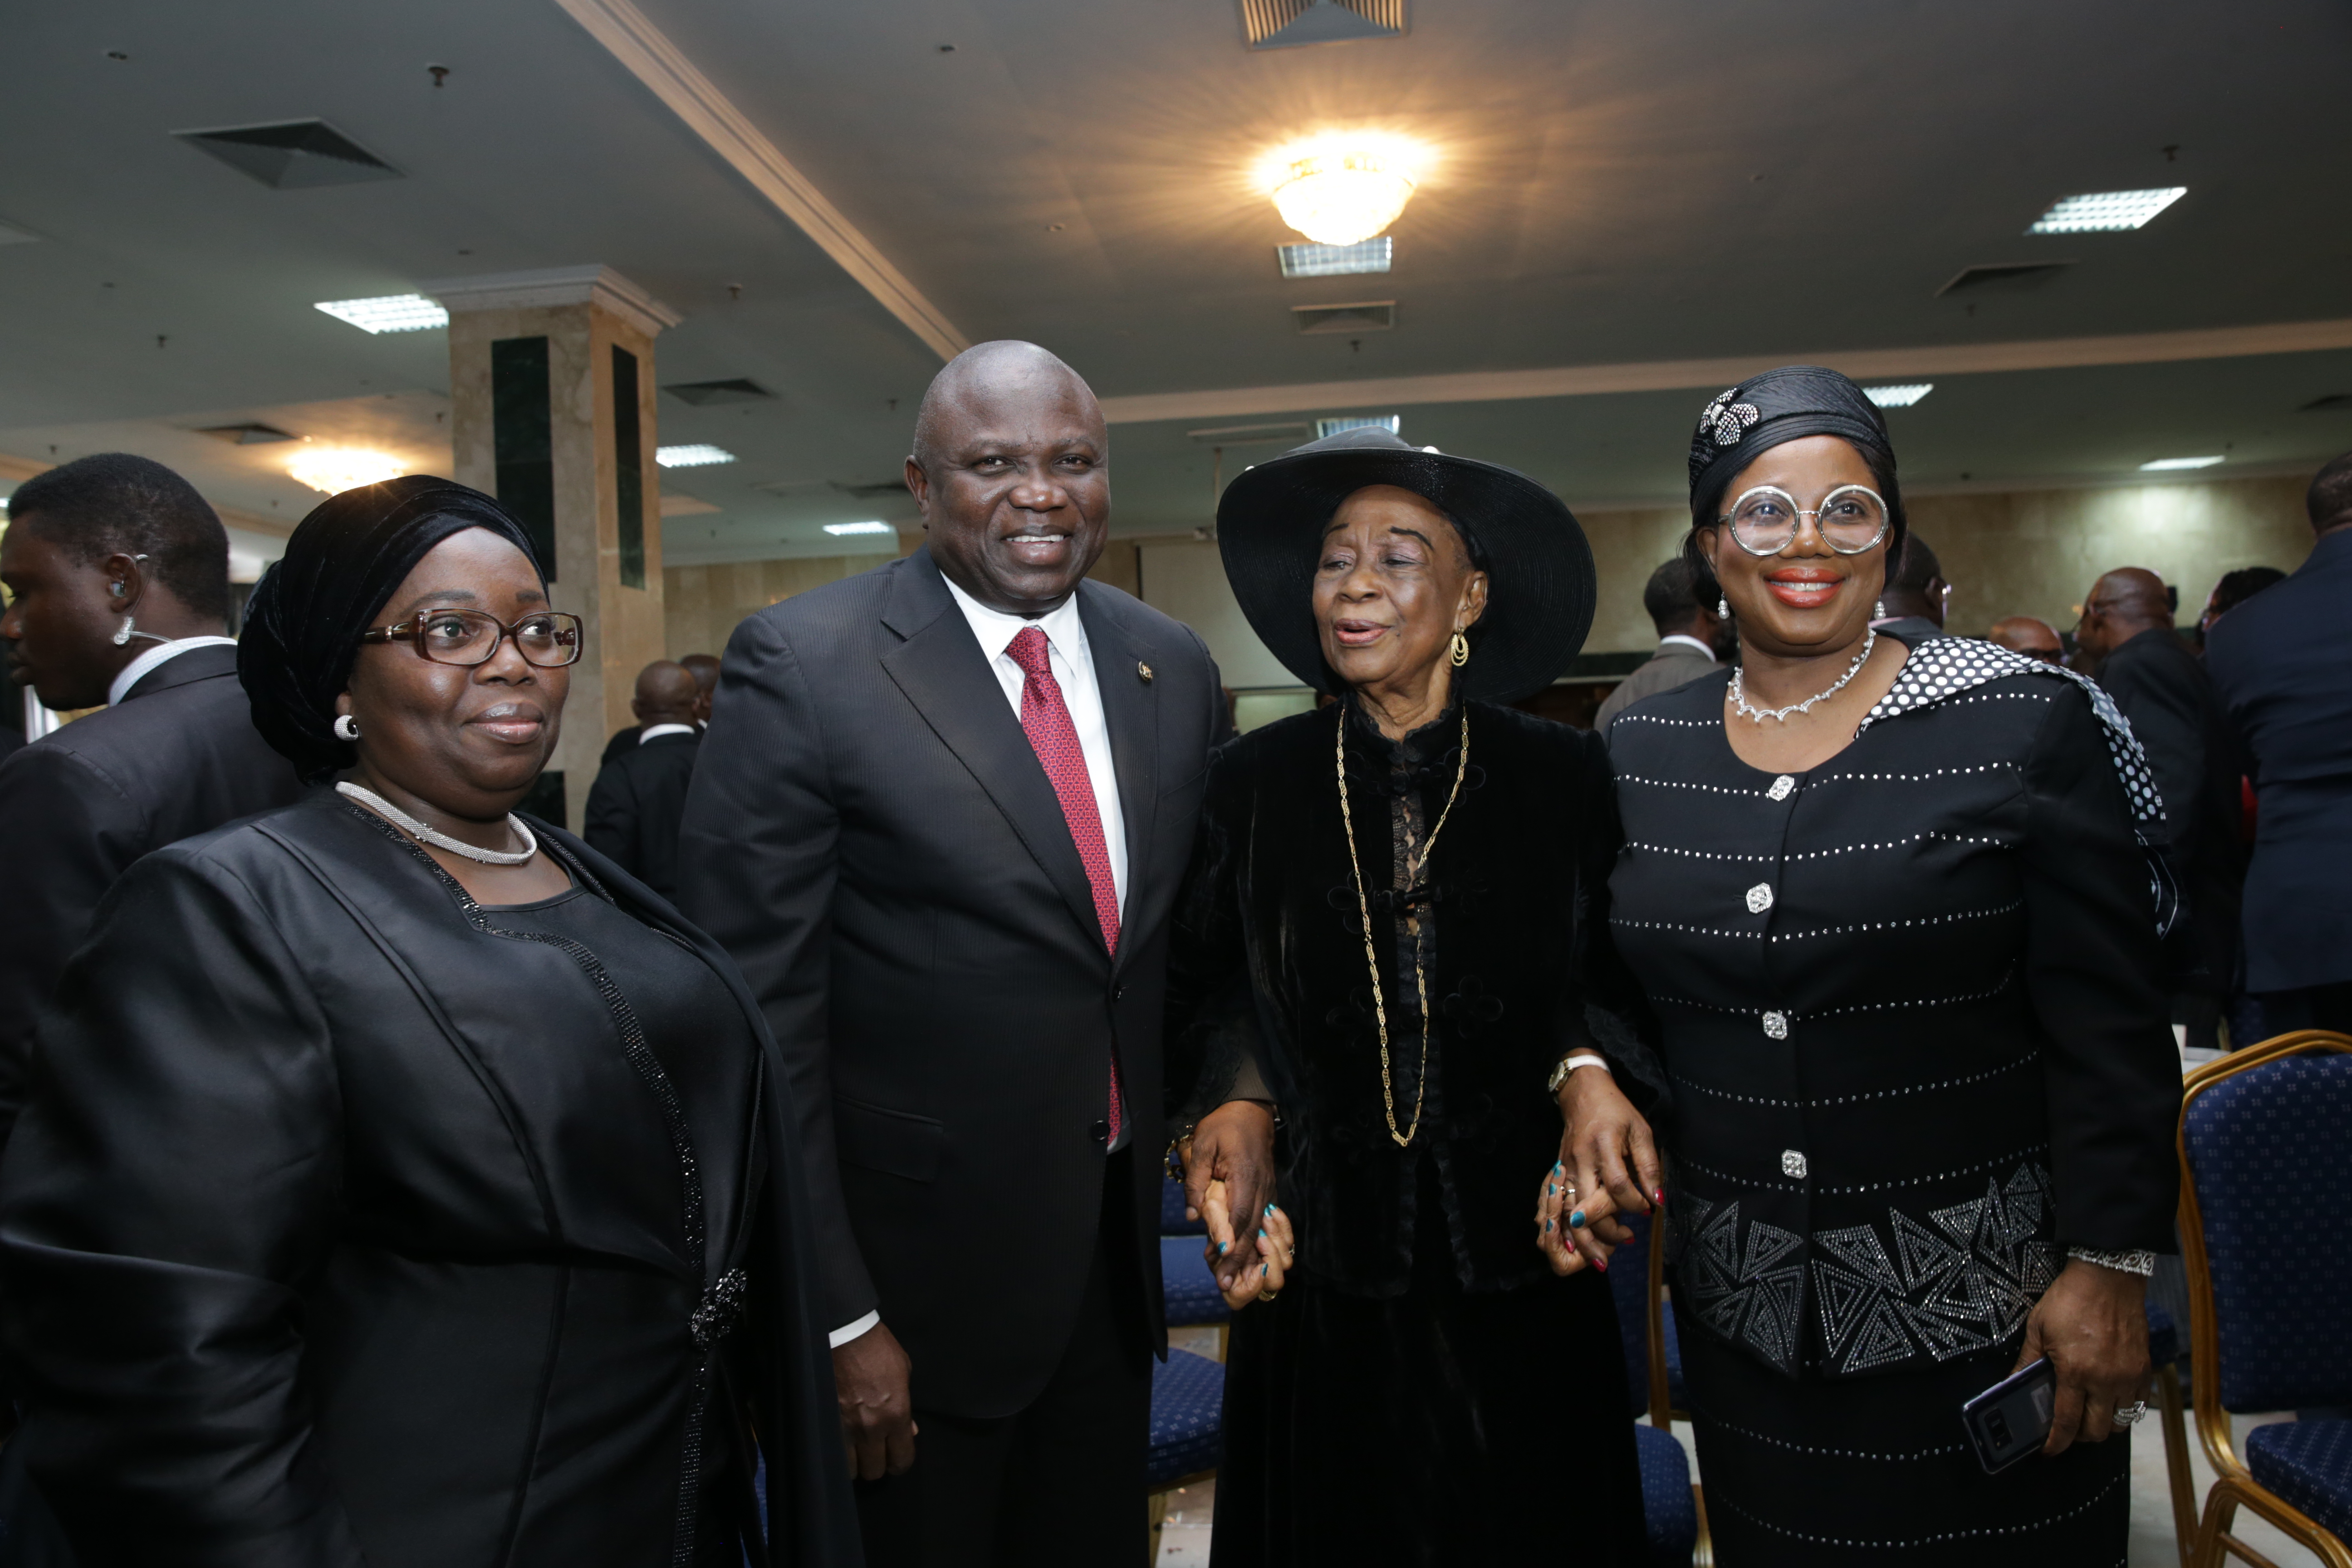 Lagos State Governor, Mr. Akinwunmi Ambode (2nd left); his Deputy, Dr. (Mrs) Oluranti Adebule (left); first female Senior Advocate of Nigeria (SAN). Chief (Mrs) Folake Solanke (2nd right) and Lagos State Chief Judge, Justice Opeyemi Oke (right) during the Lagos State Judiciary first Bi-Annual lecture, at the Lagos City Hall, Lagos Island, on Monday, May 14, 2018.